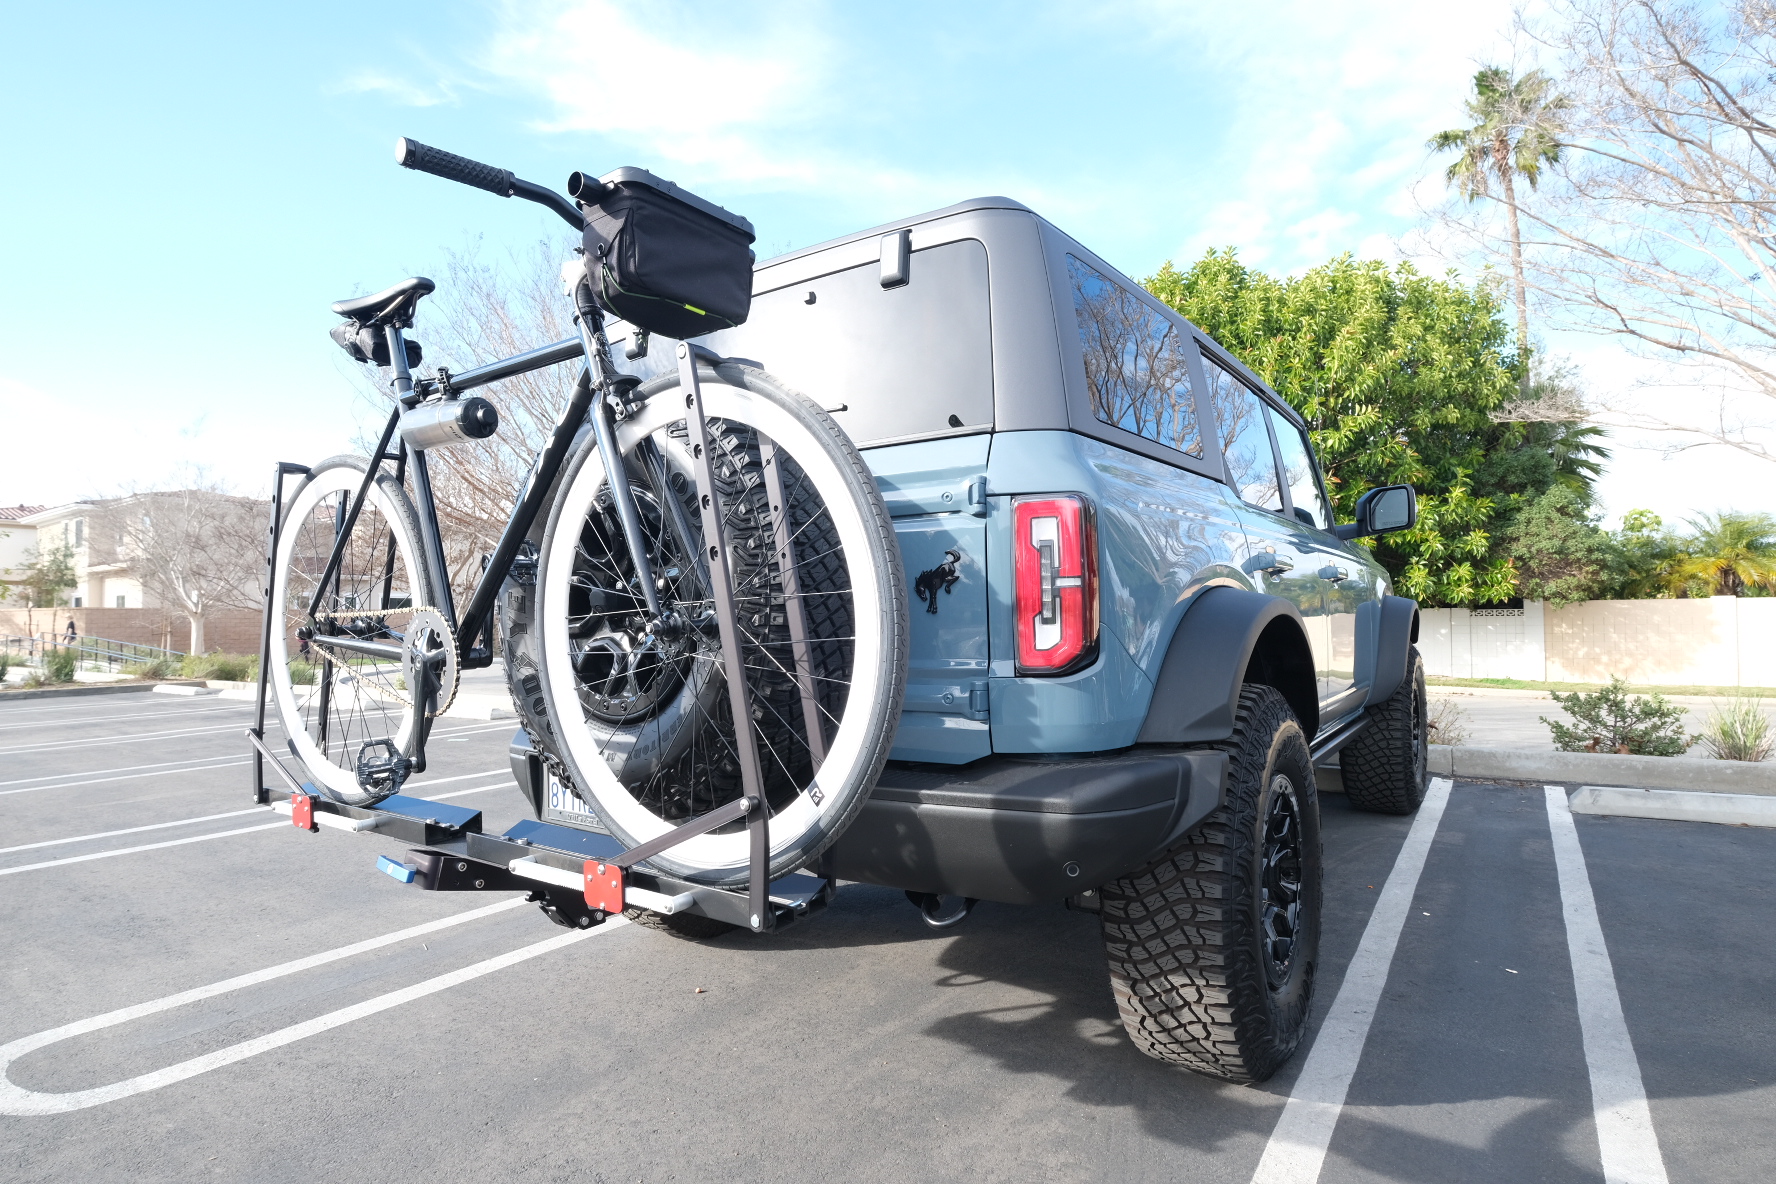 Ford Bronco Hitch Mount Bike Rack Options - Post your pics 082A0AE1-838F-47FF-AF09-9BCC359A673C